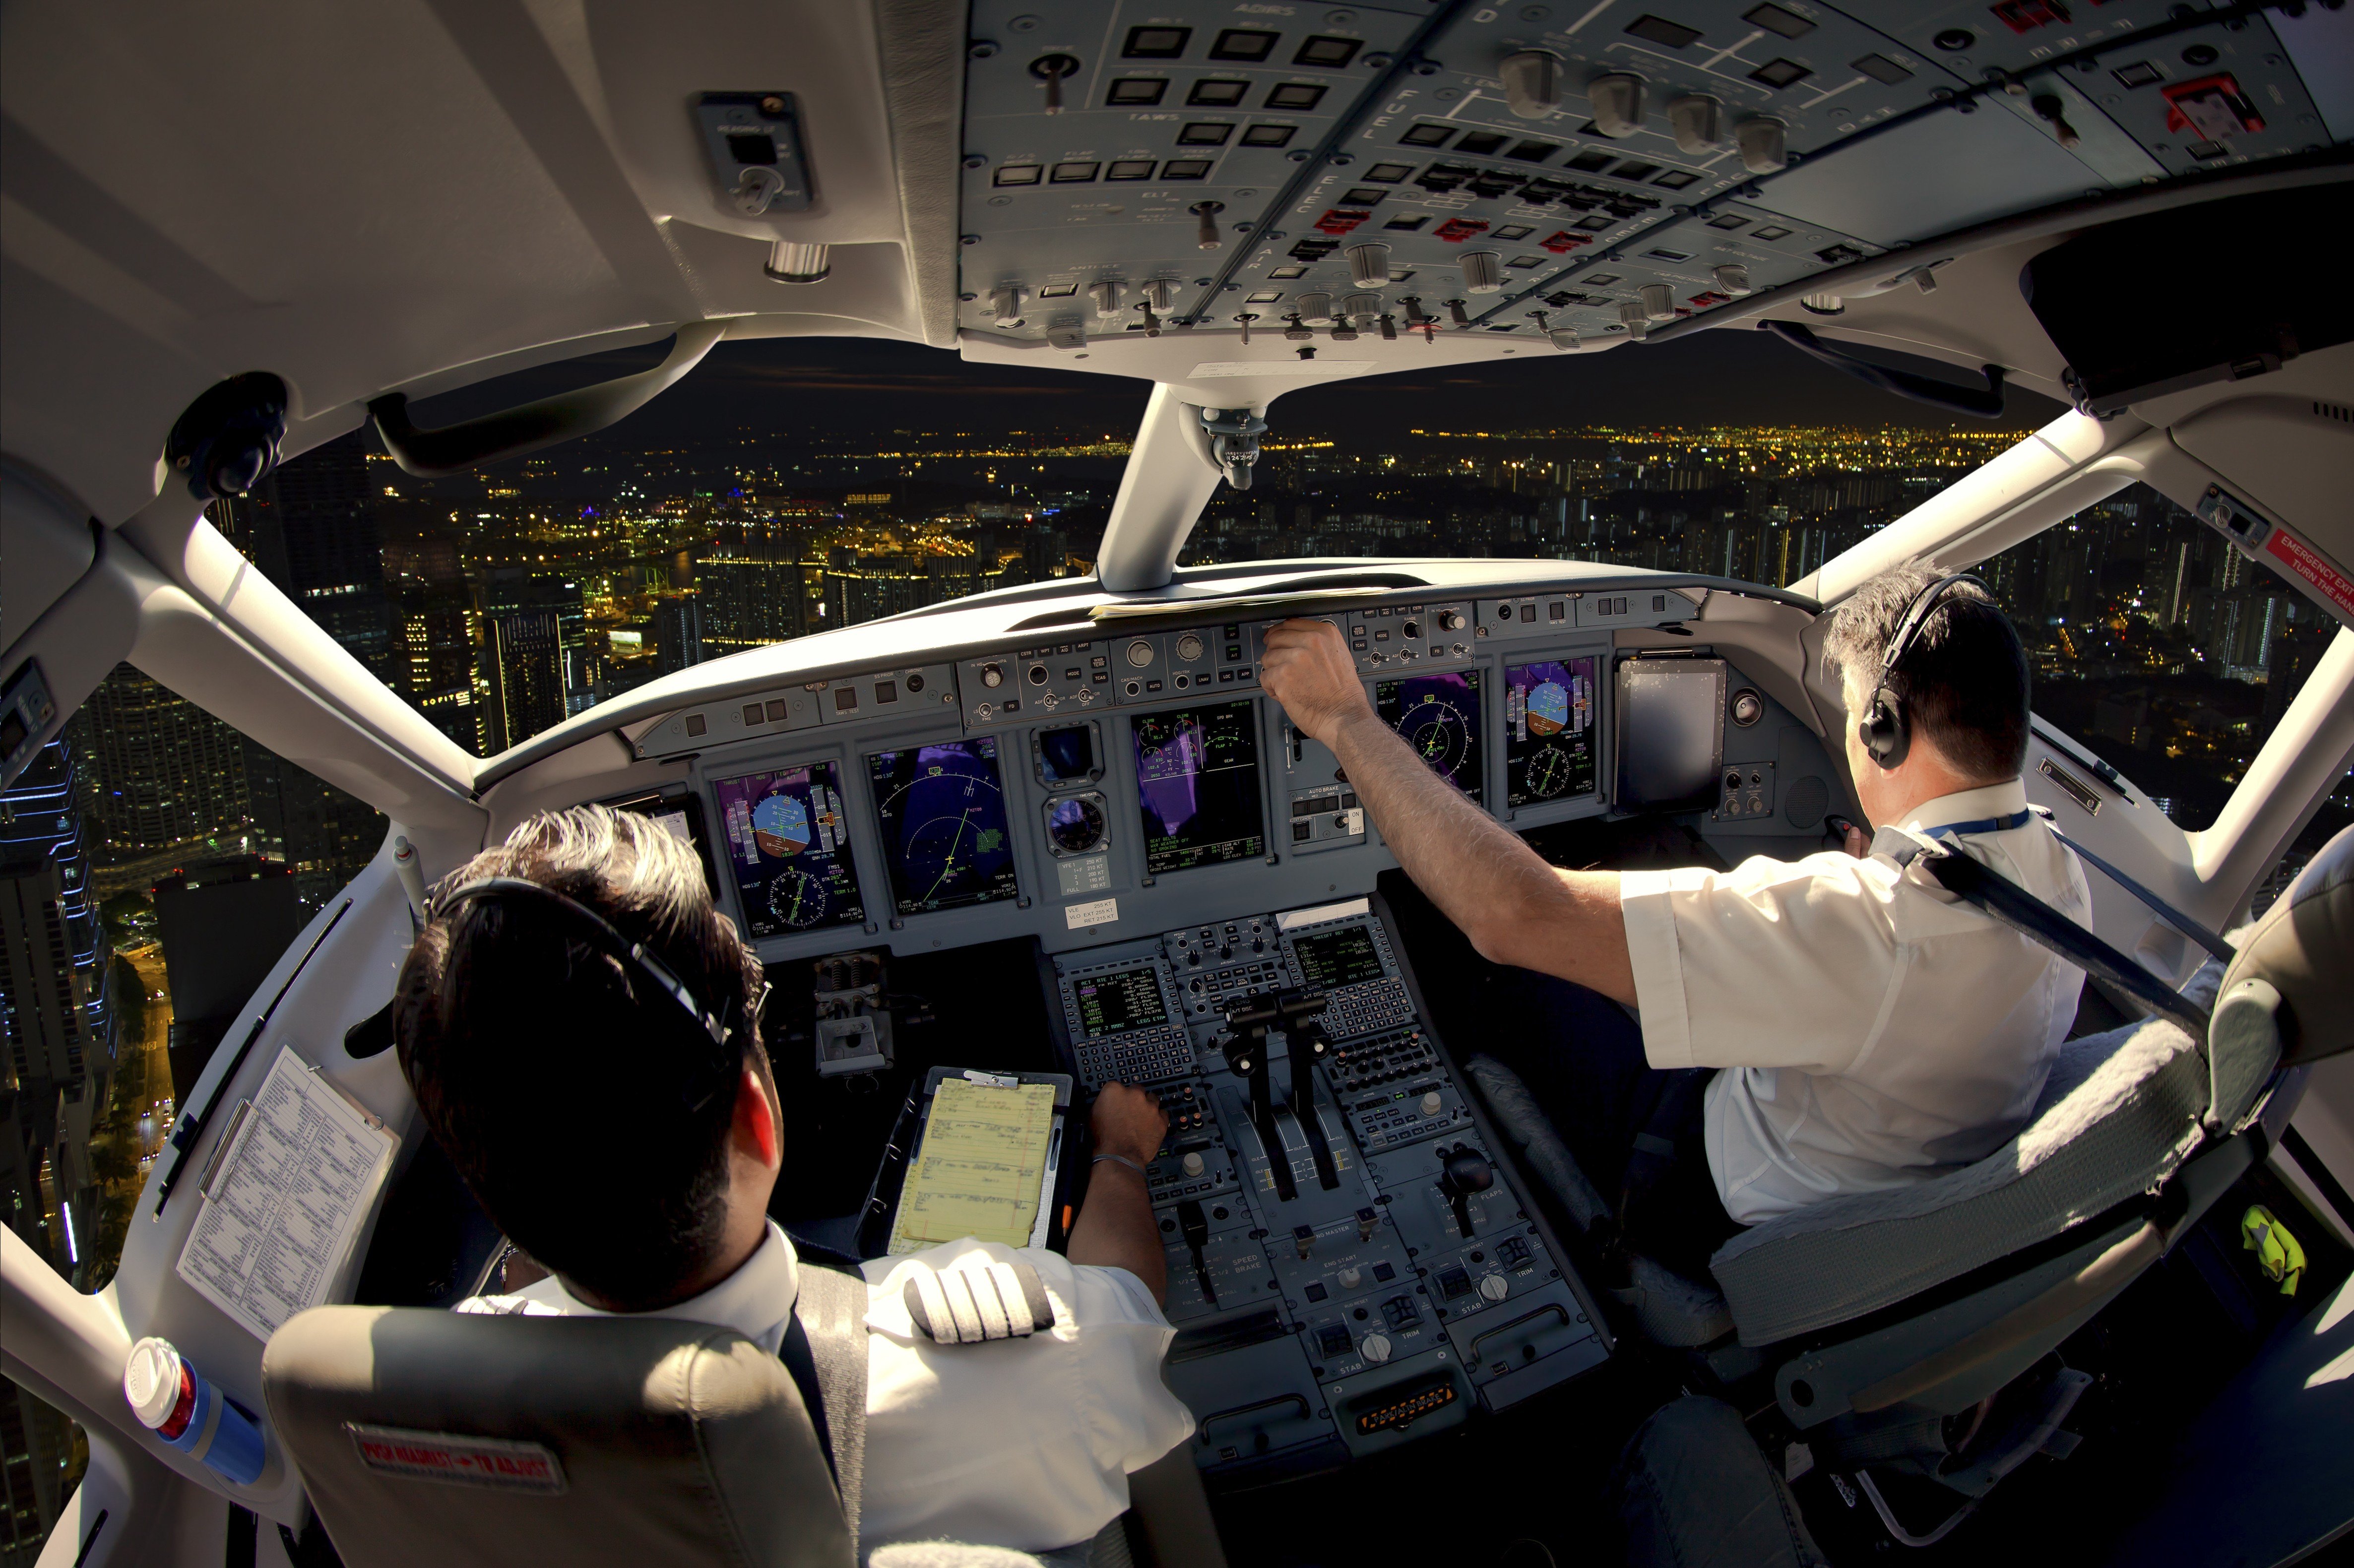 The Vocational Training Council and HKU Space Community College offer aviation courses in Hong Kong. Photo: Shutterstock